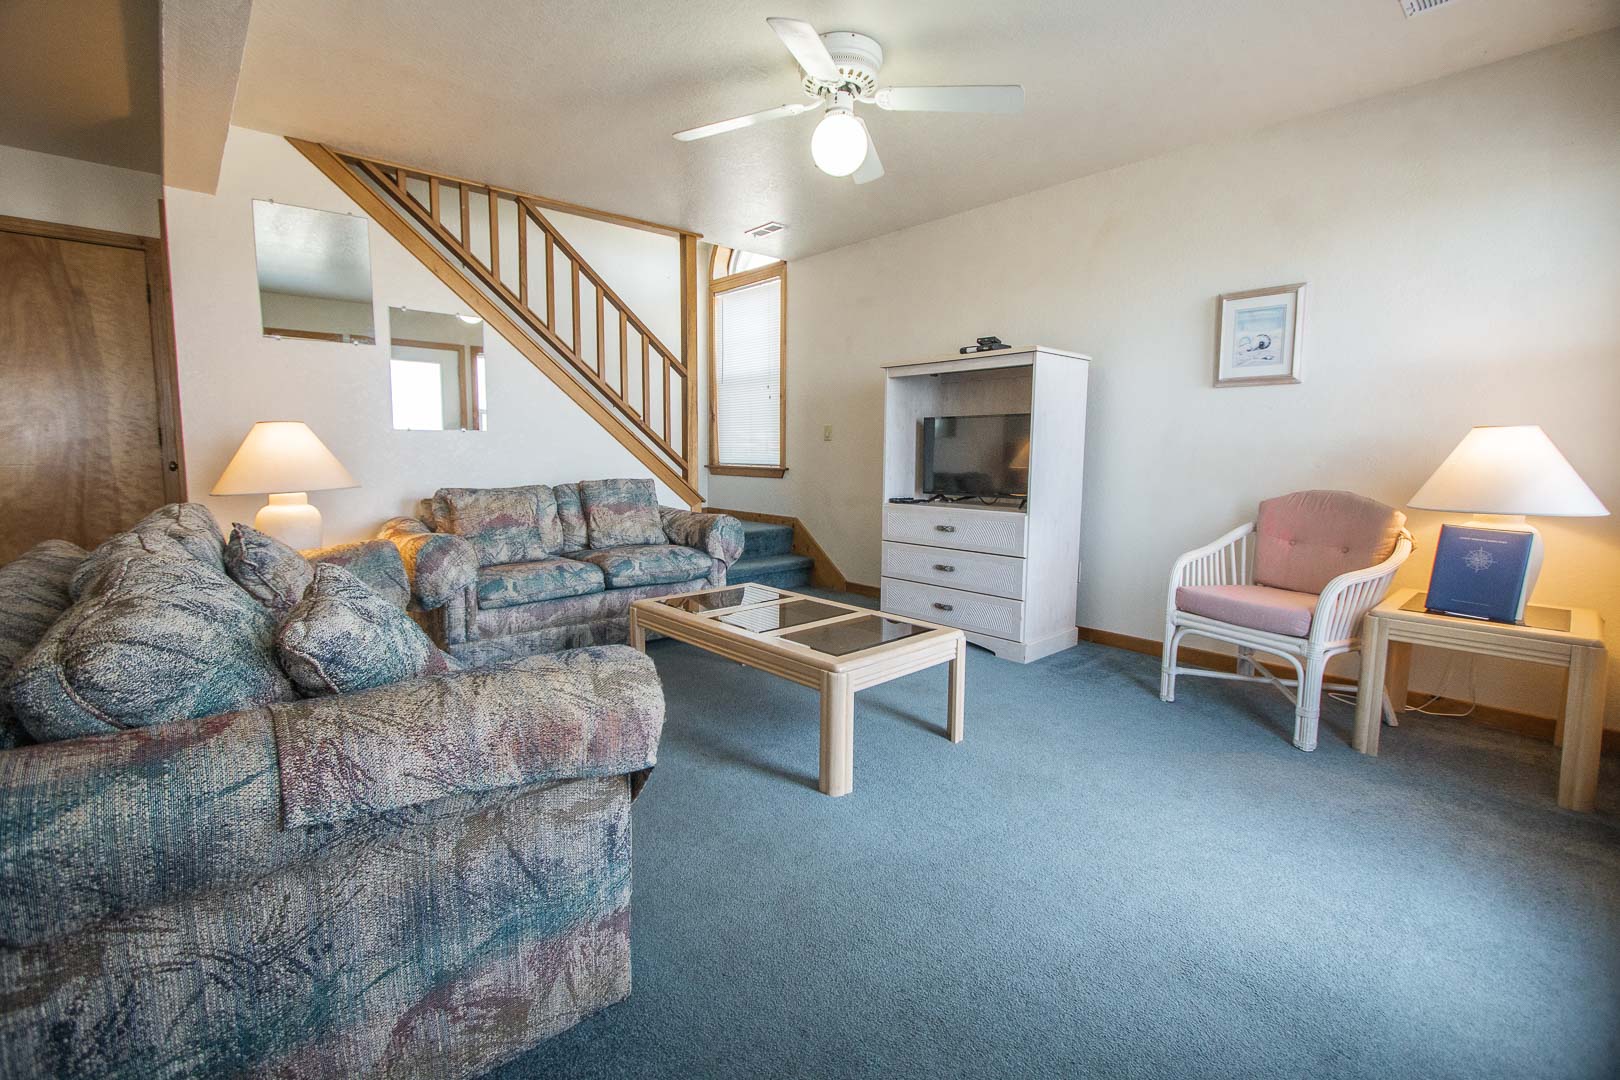 A cozy living room area at VRI's Barrier Island Station in North Carolina.